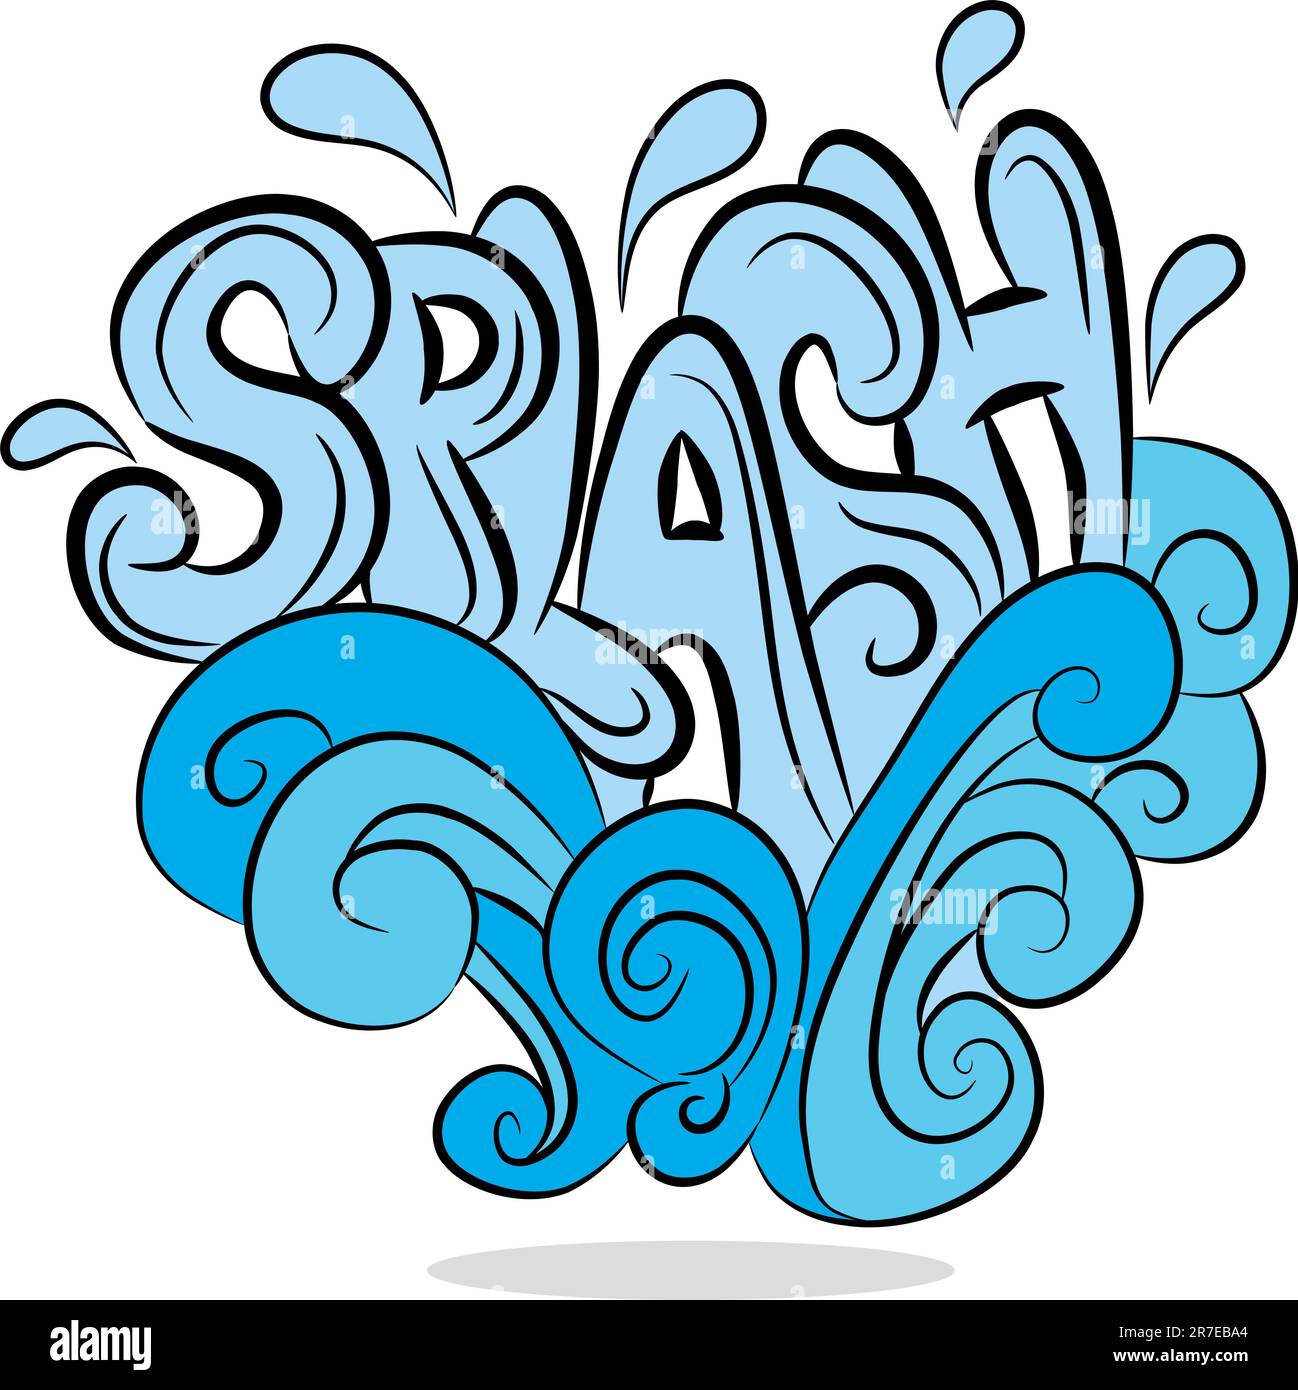 An image of a water splash sound effect text. Stock Vector